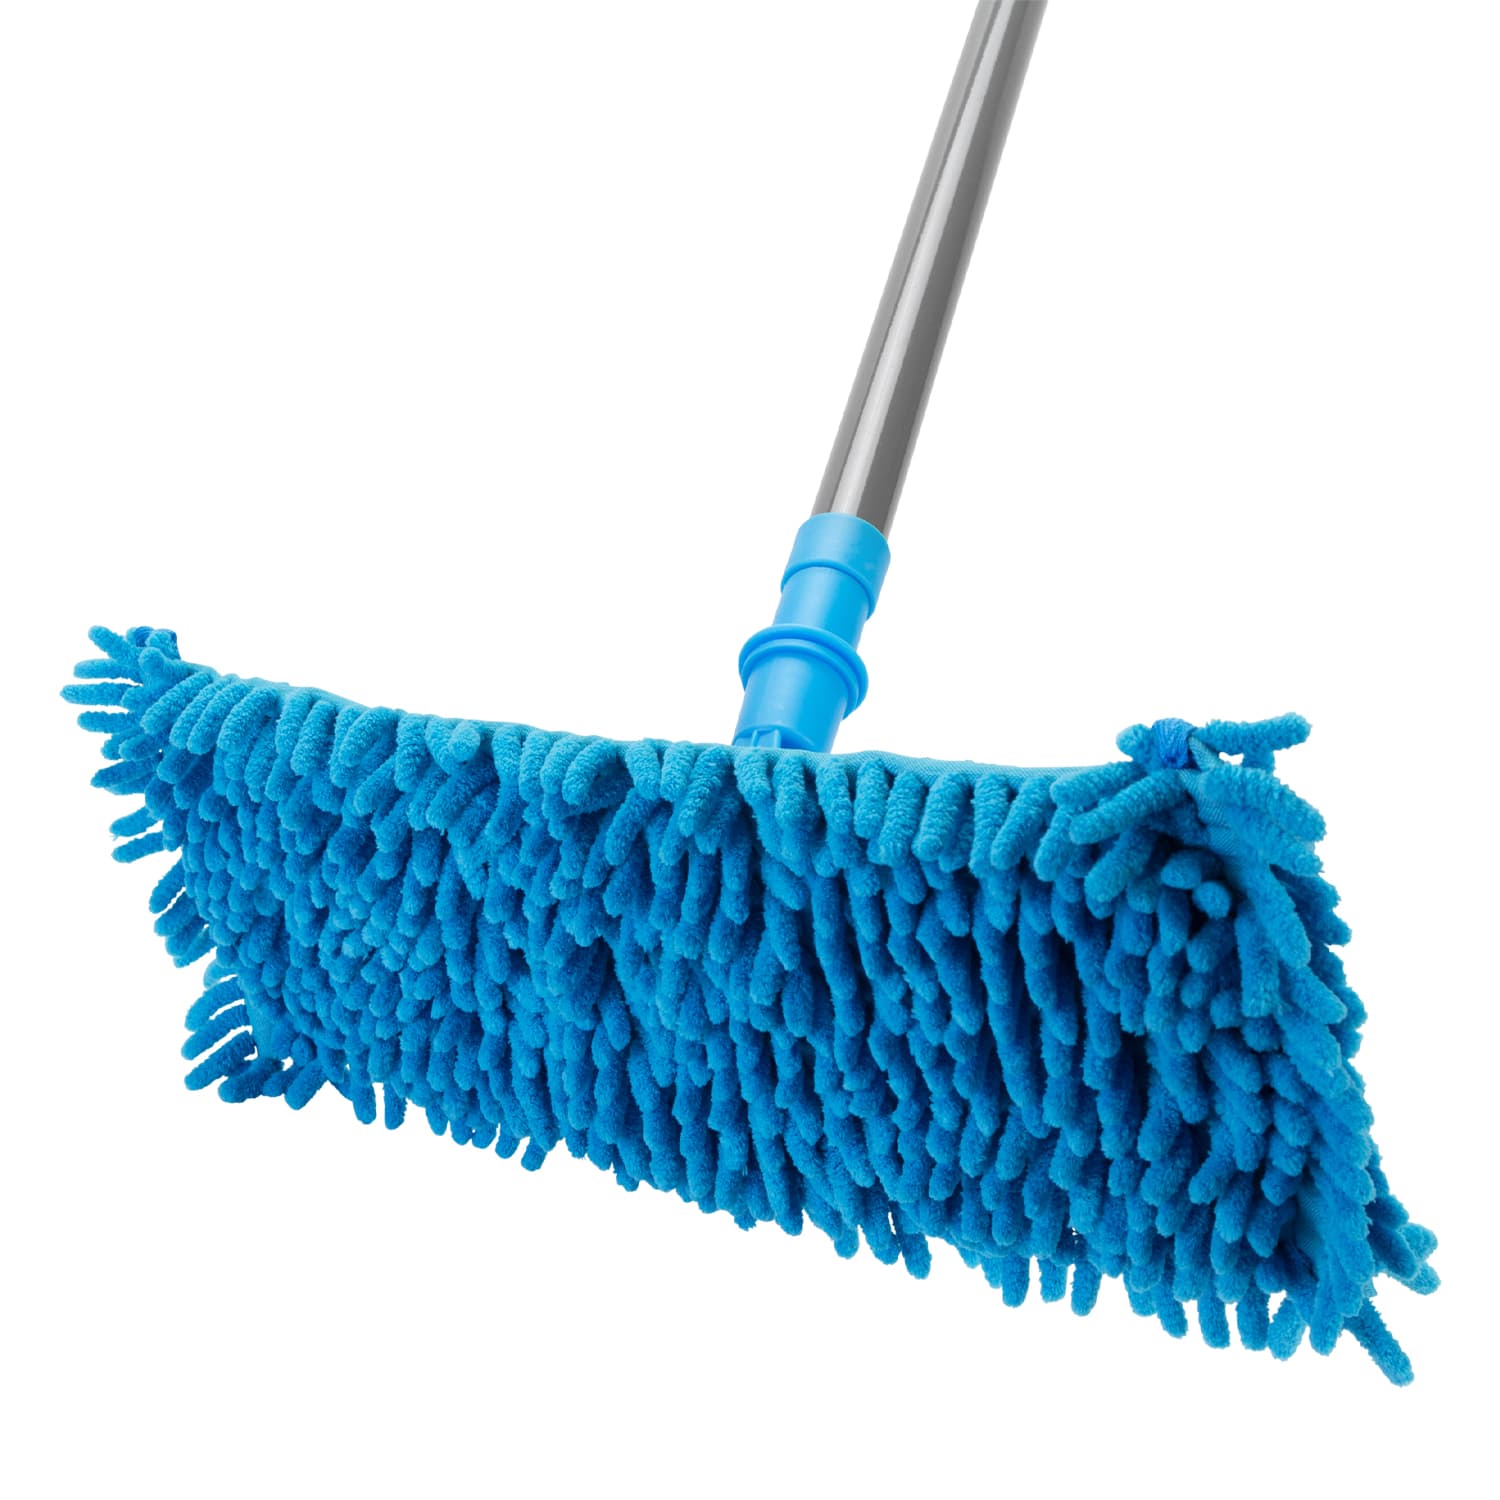 Super Absorbent Chenille Mop - Tackle Wet & Dry Spills And